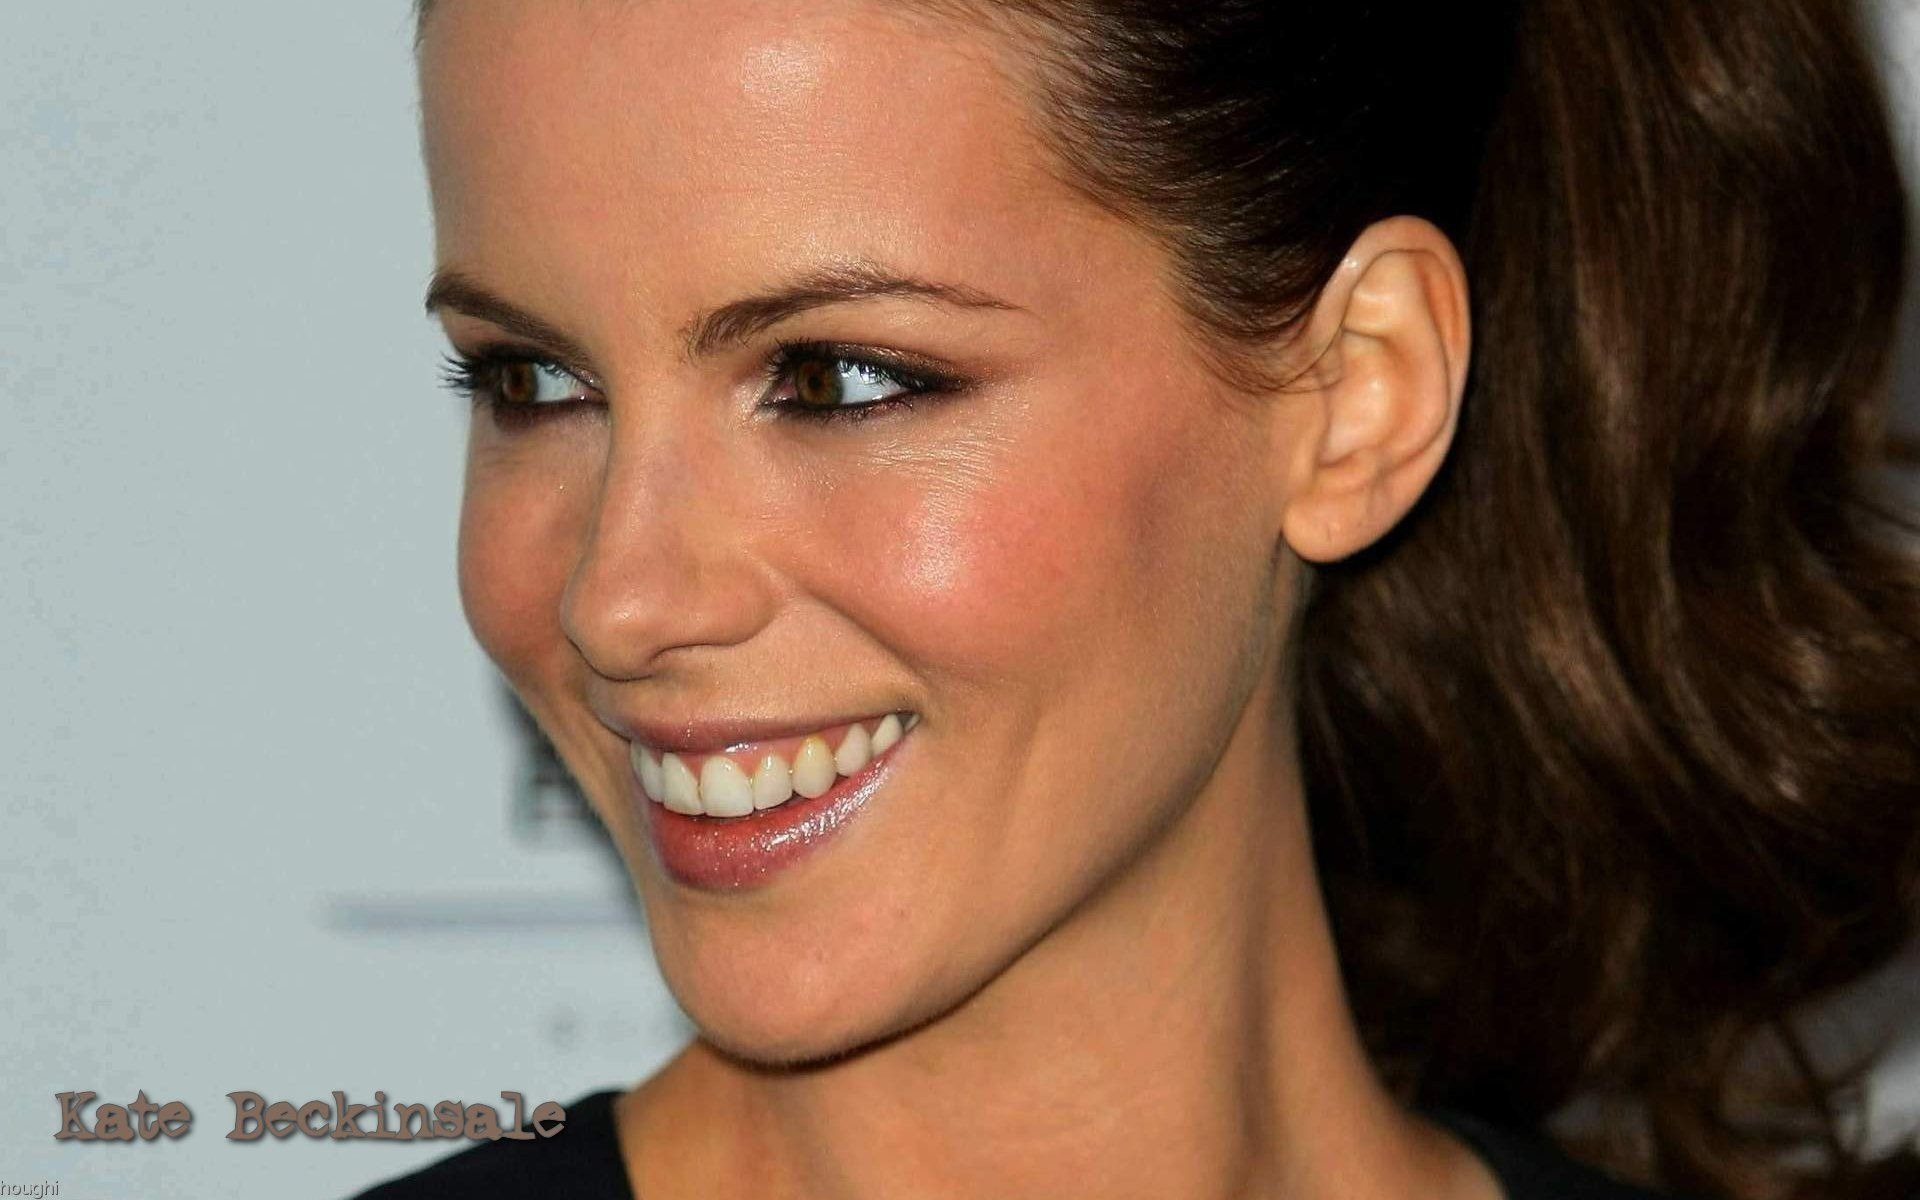 Kate Beckinsale #077 - 1920x1200 Wallpapers Pictures Photos Images